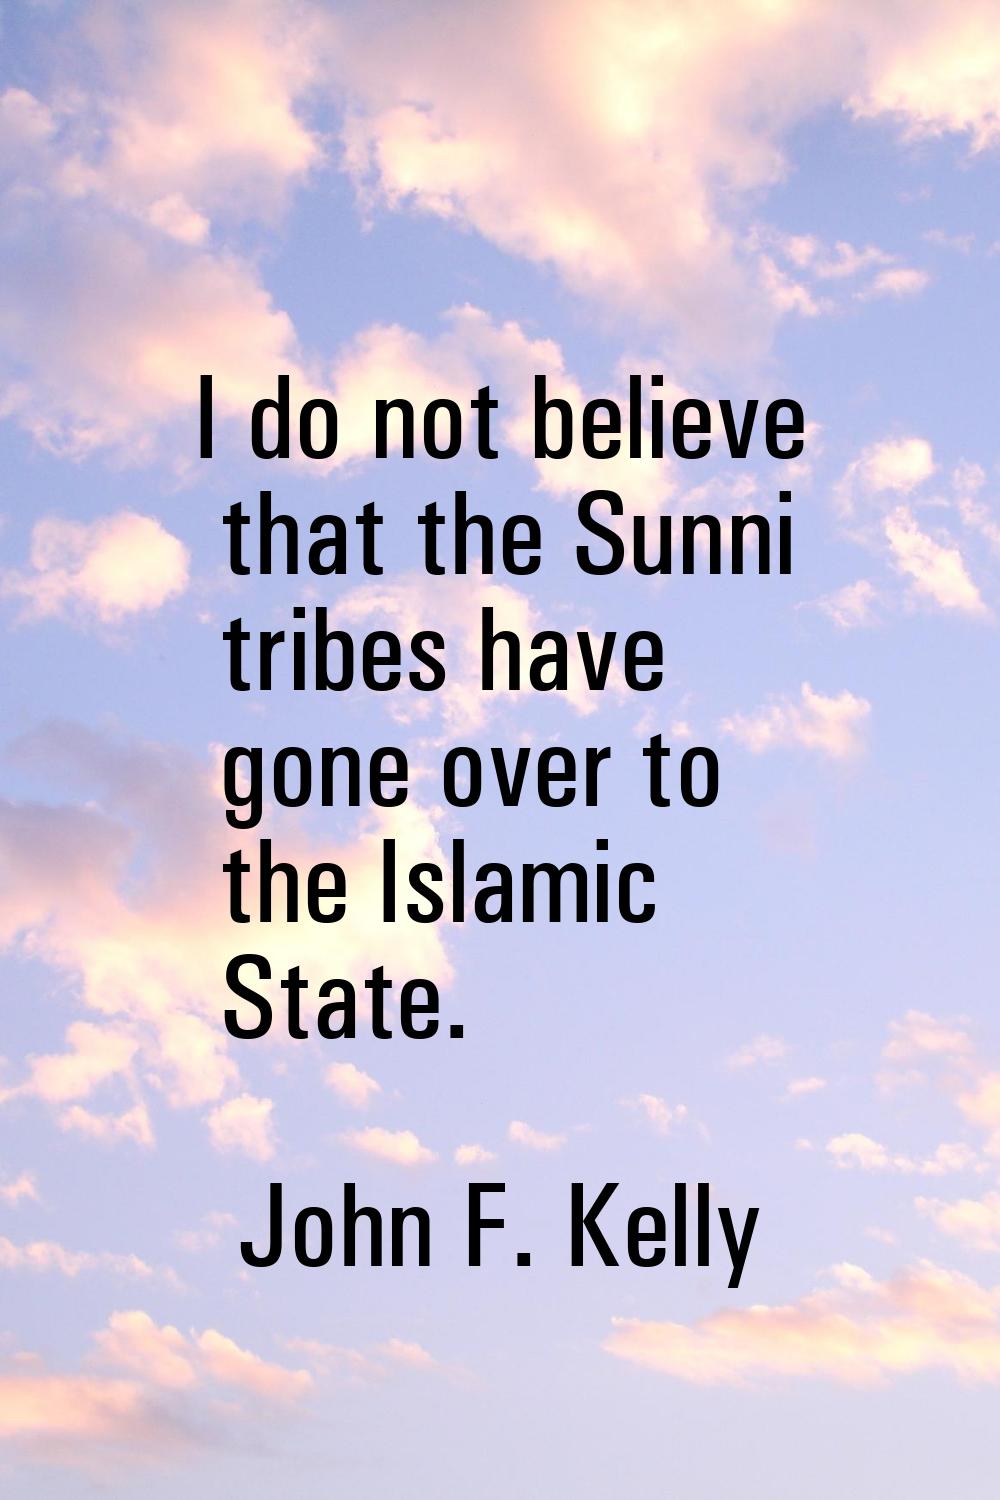 I do not believe that the Sunni tribes have gone over to the Islamic State.